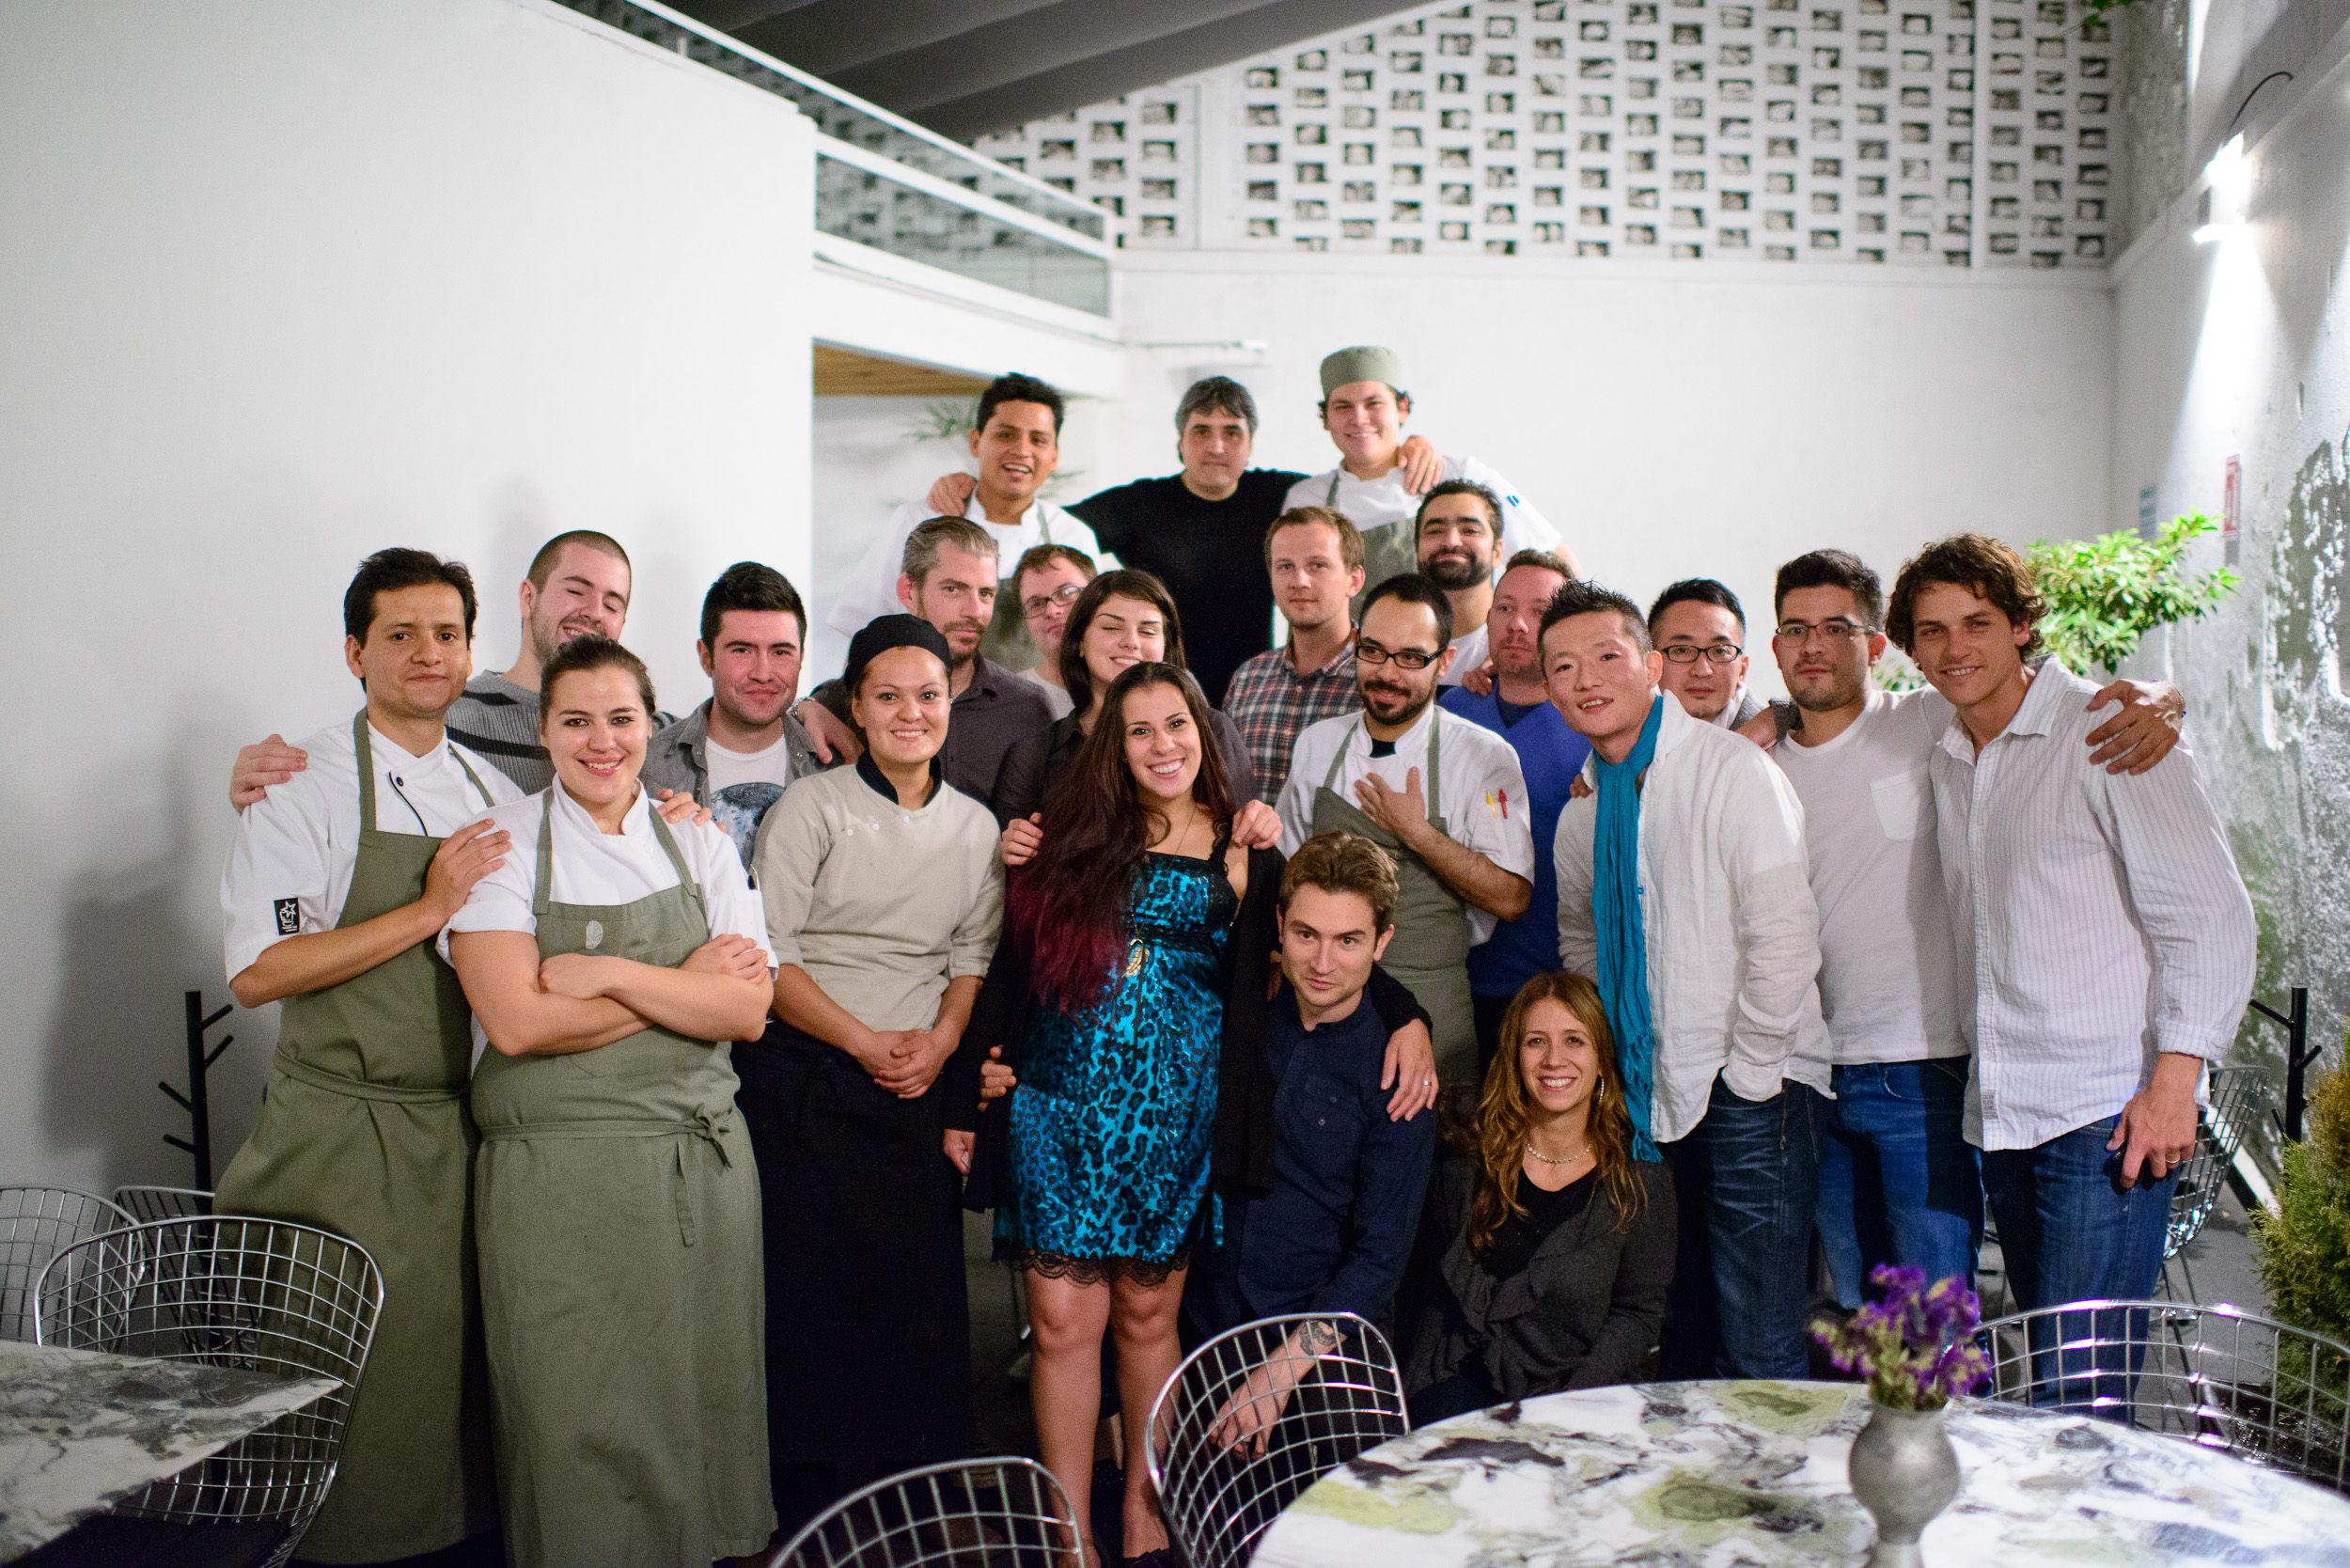 Staff of Quintonil with visiting chefs for Mesamerica 2012